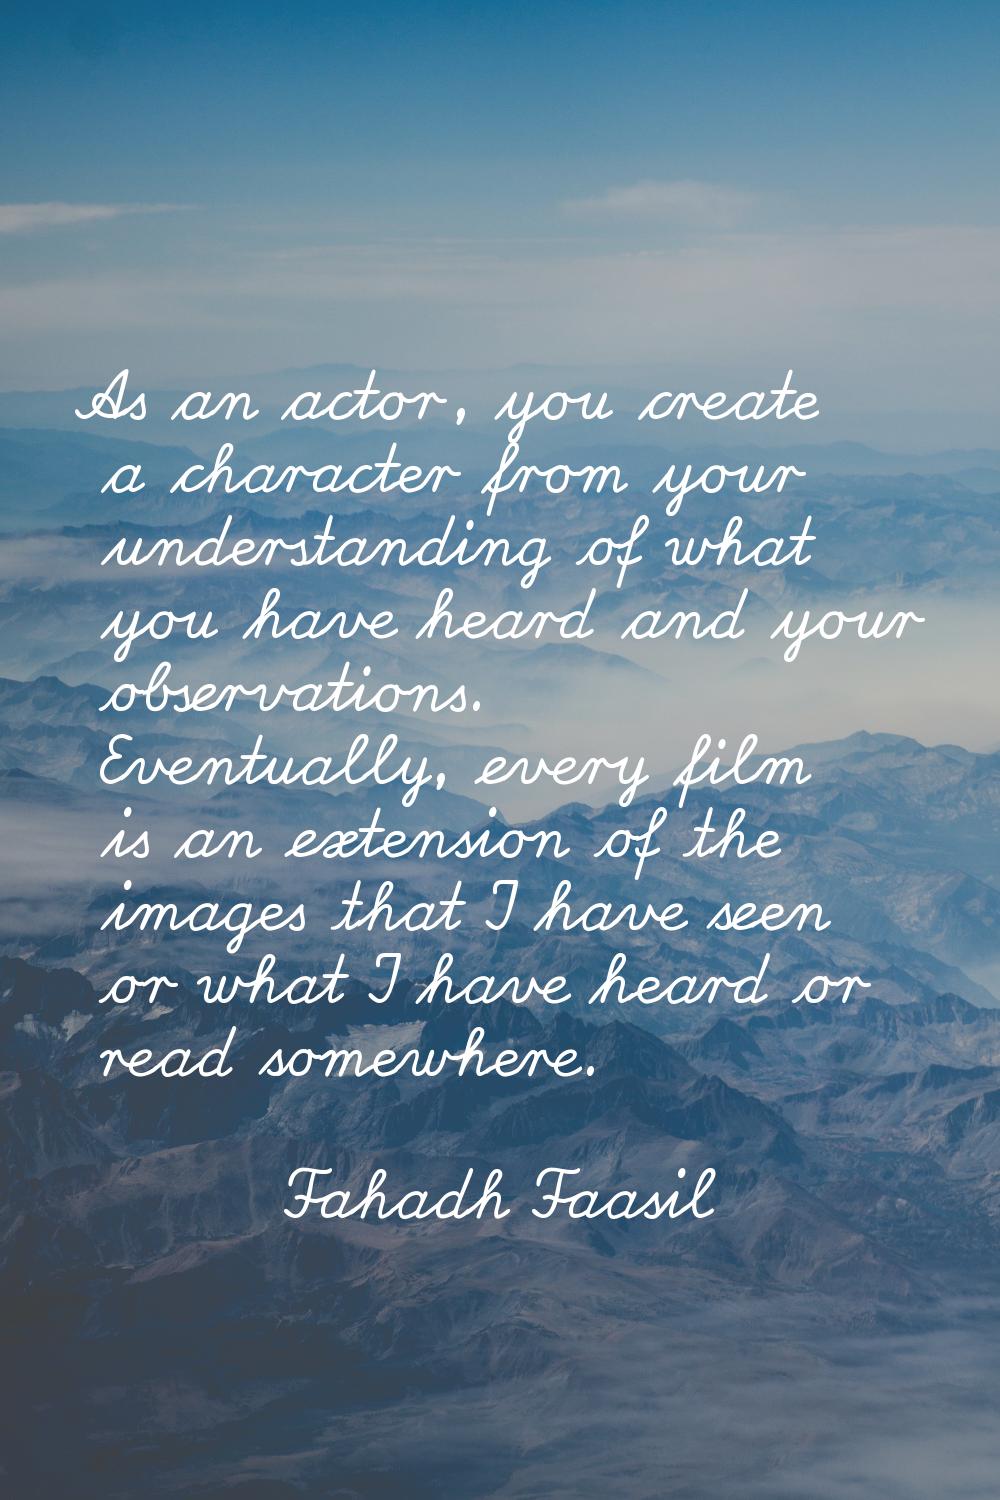 As an actor, you create a character from your understanding of what you have heard and your observa